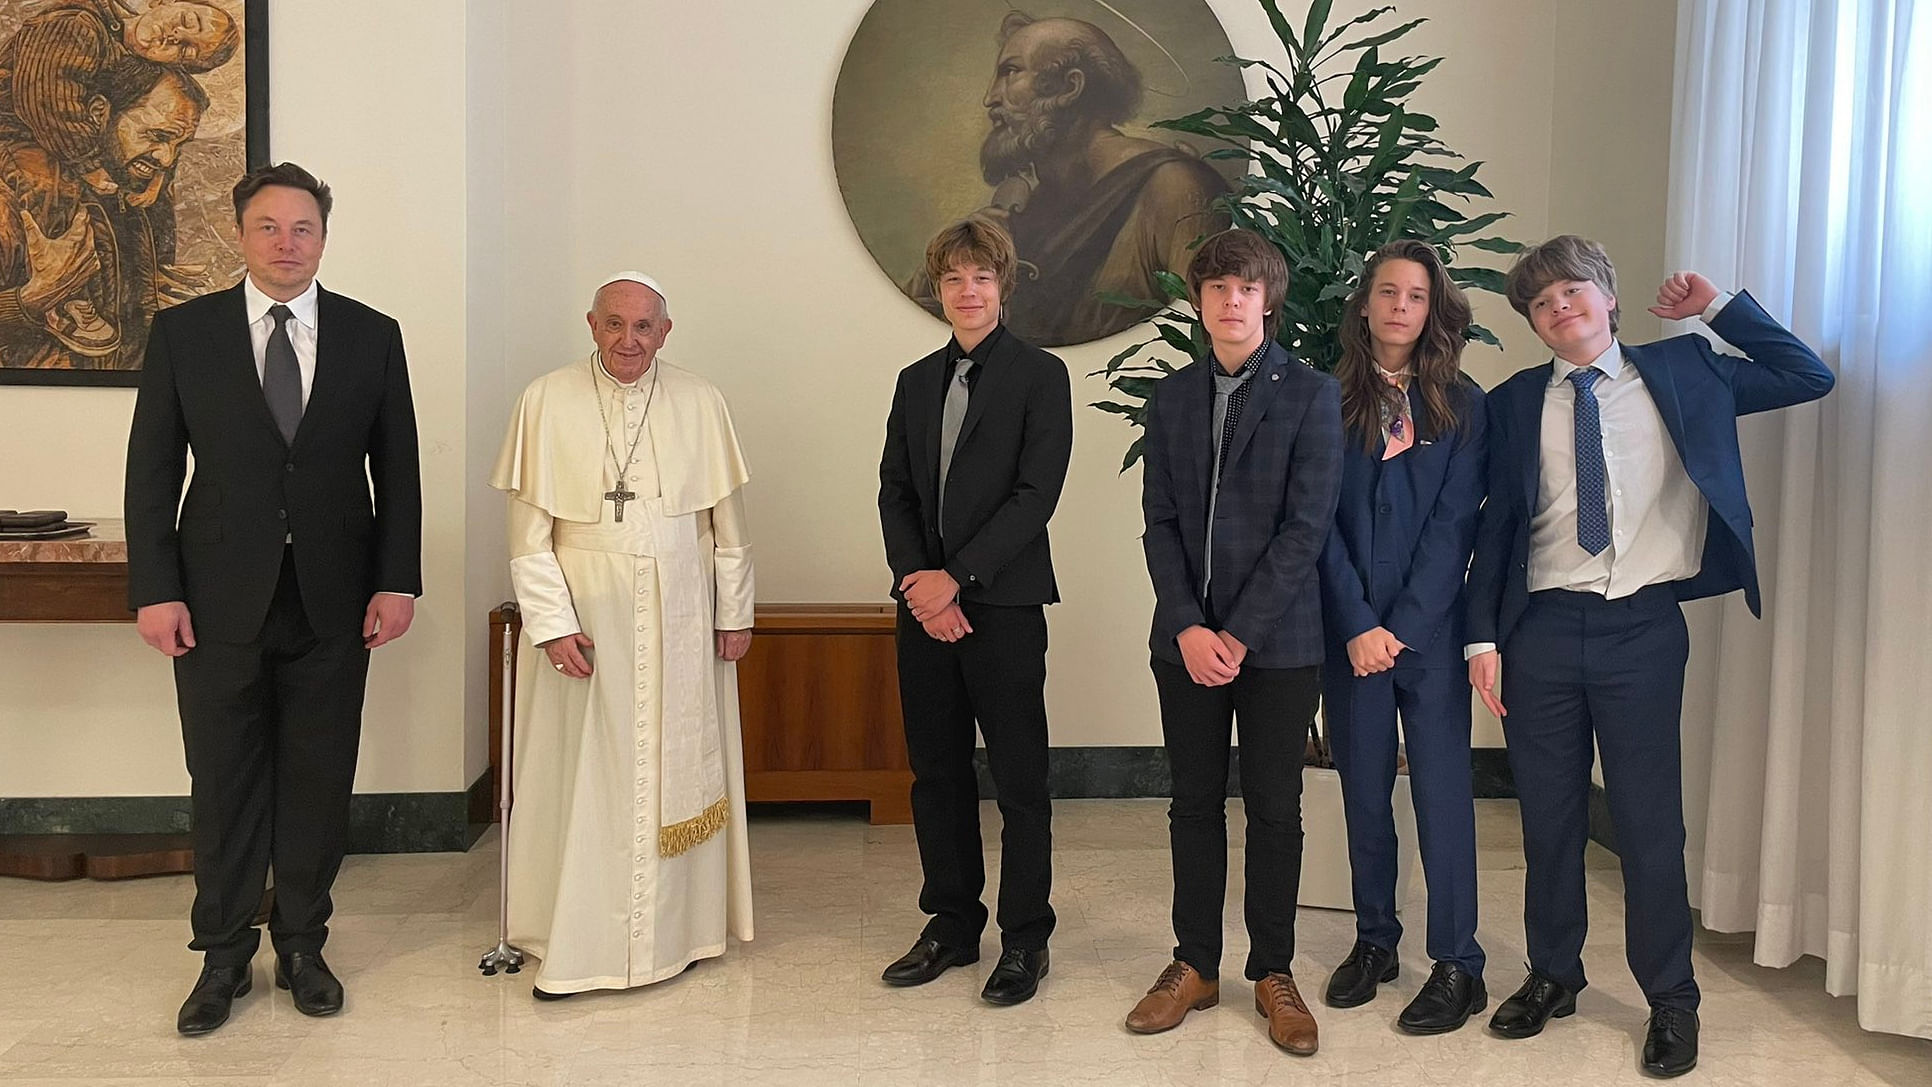 The world's richest person tweeted a picture where he can be seen standing next to the Pope. Musk's four teenage boys are also pictured, but not his 18-year-old transgender daughter. Credit: Twitter/@Elonmusk